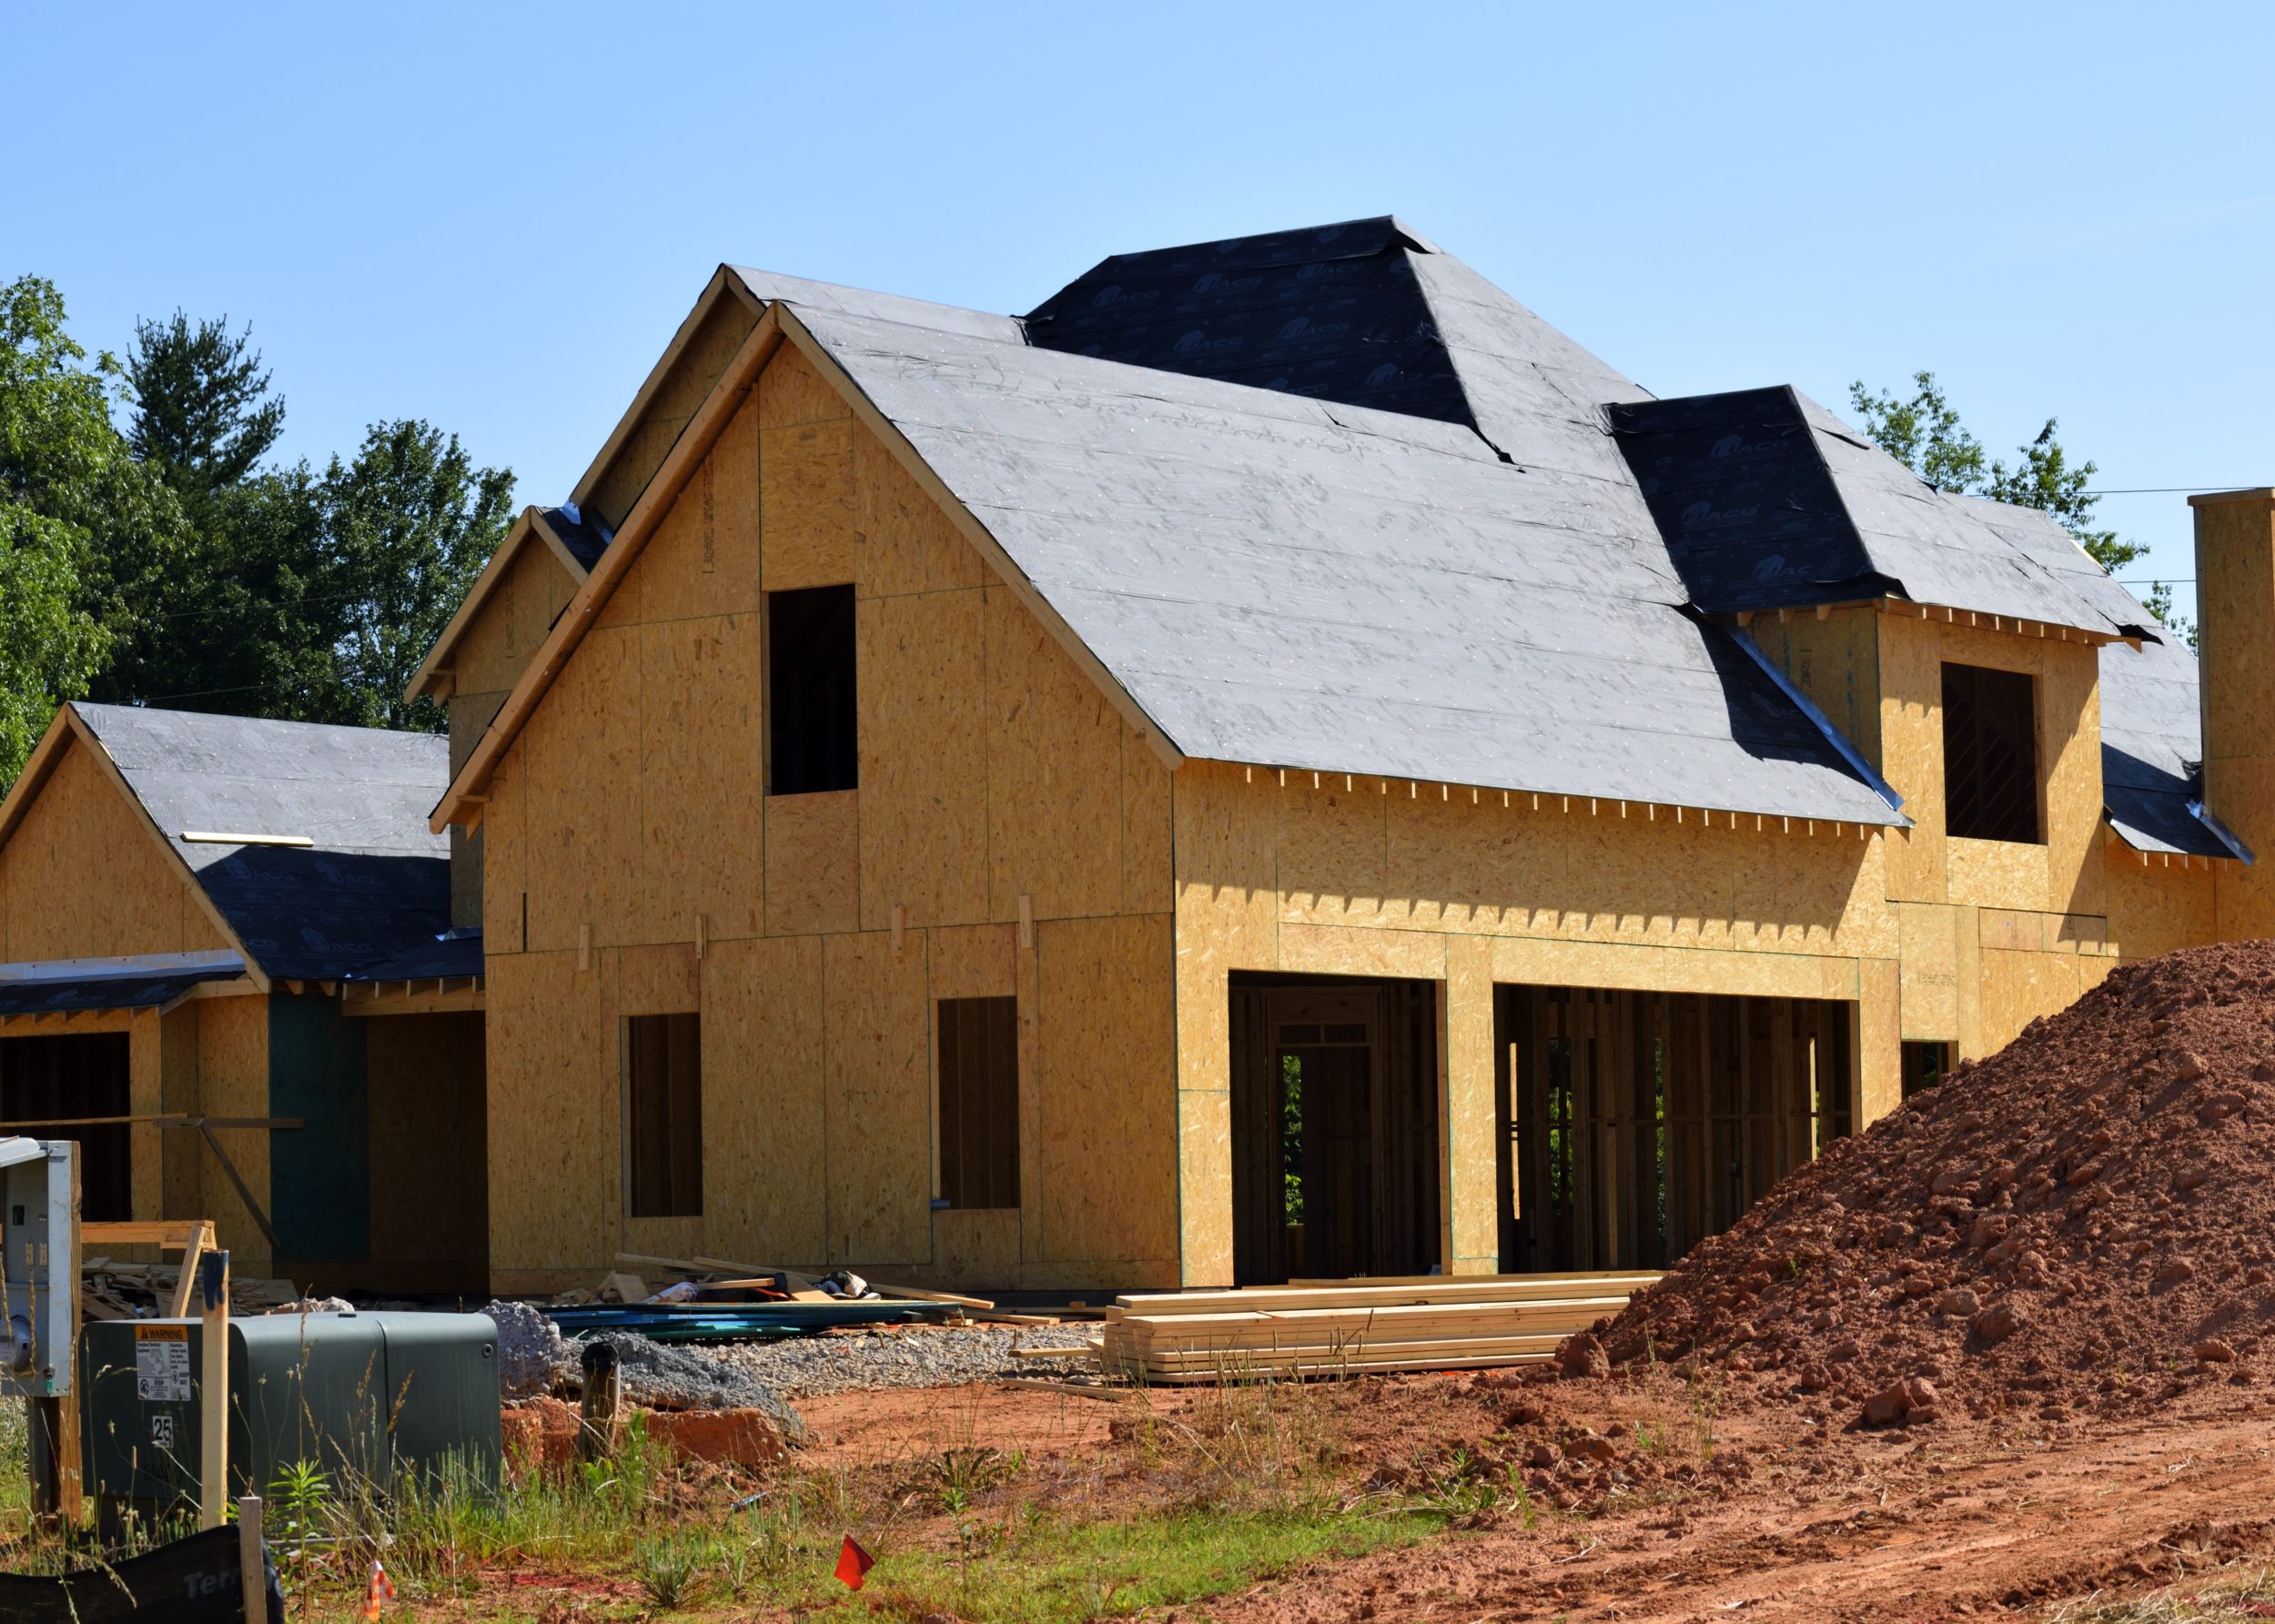 A home under construction representing an anti-SLAPP motion between a land developer and a non-profit organization